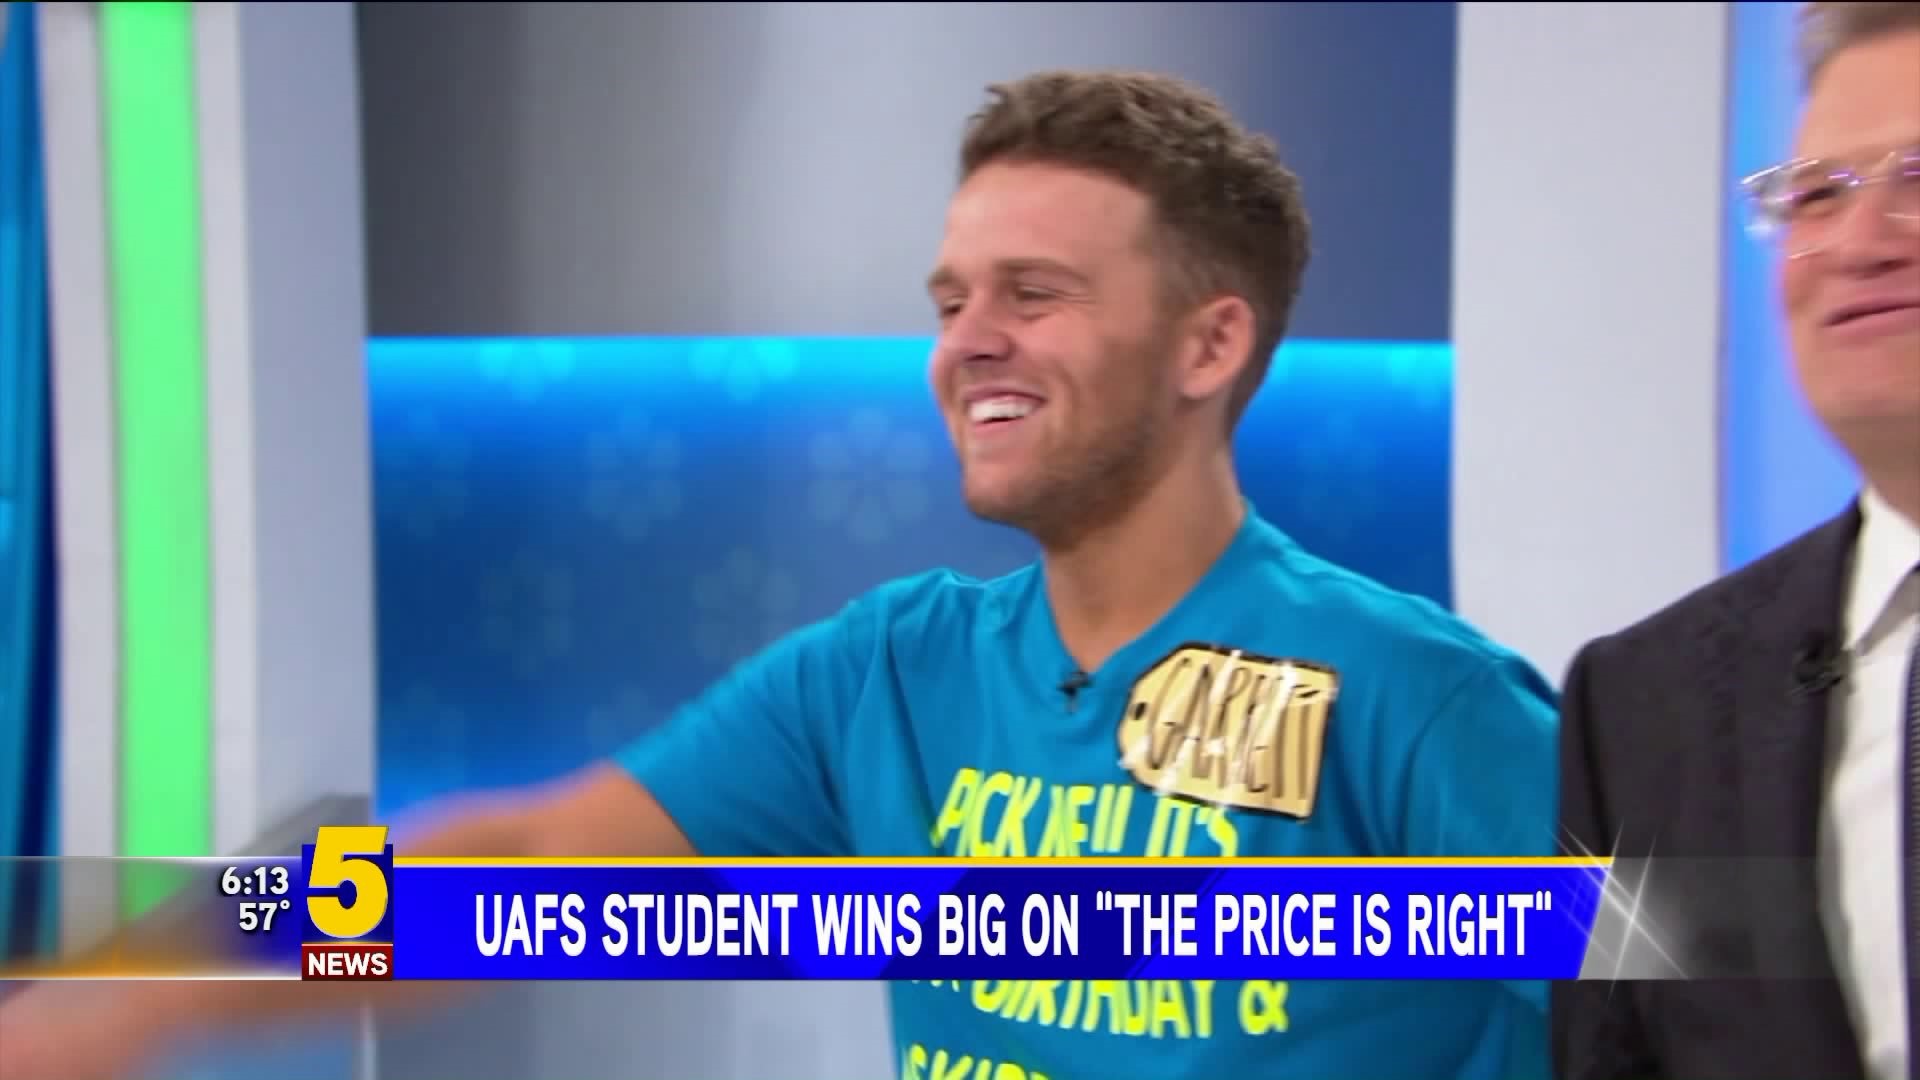 FS Guy On Price Is Right